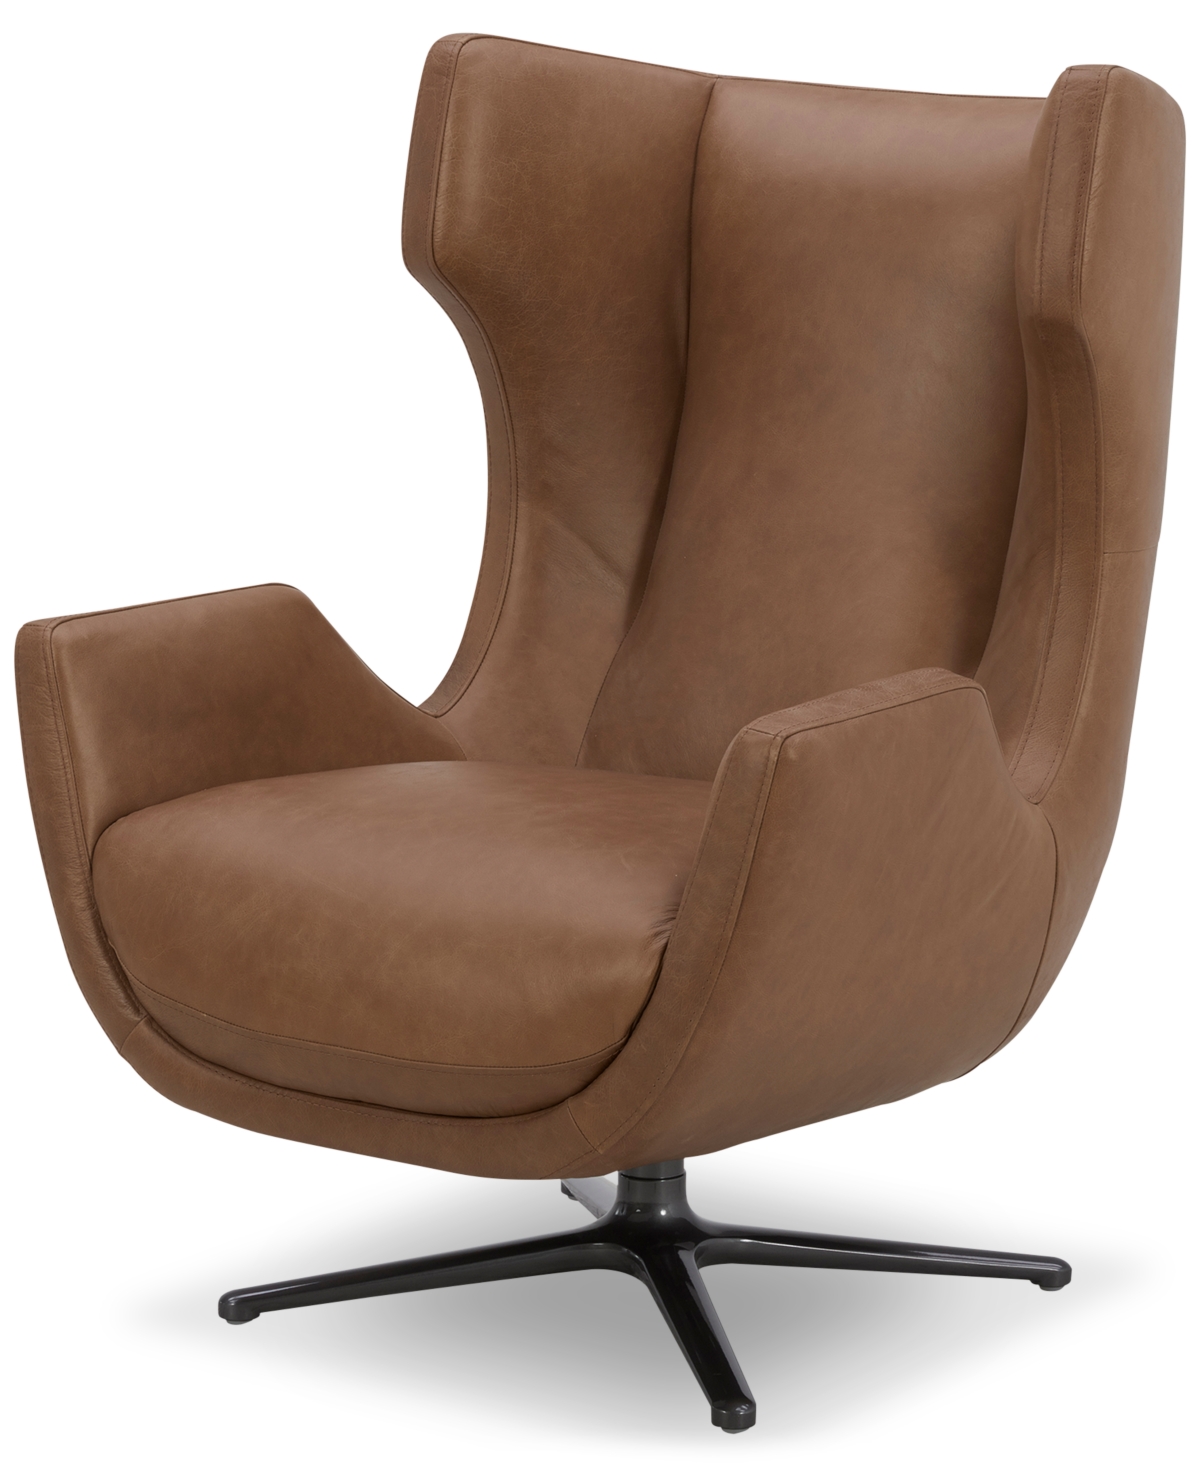 Furniture Adney 31" Leather Swivel Accent Chair, Created For Macy's In Camel